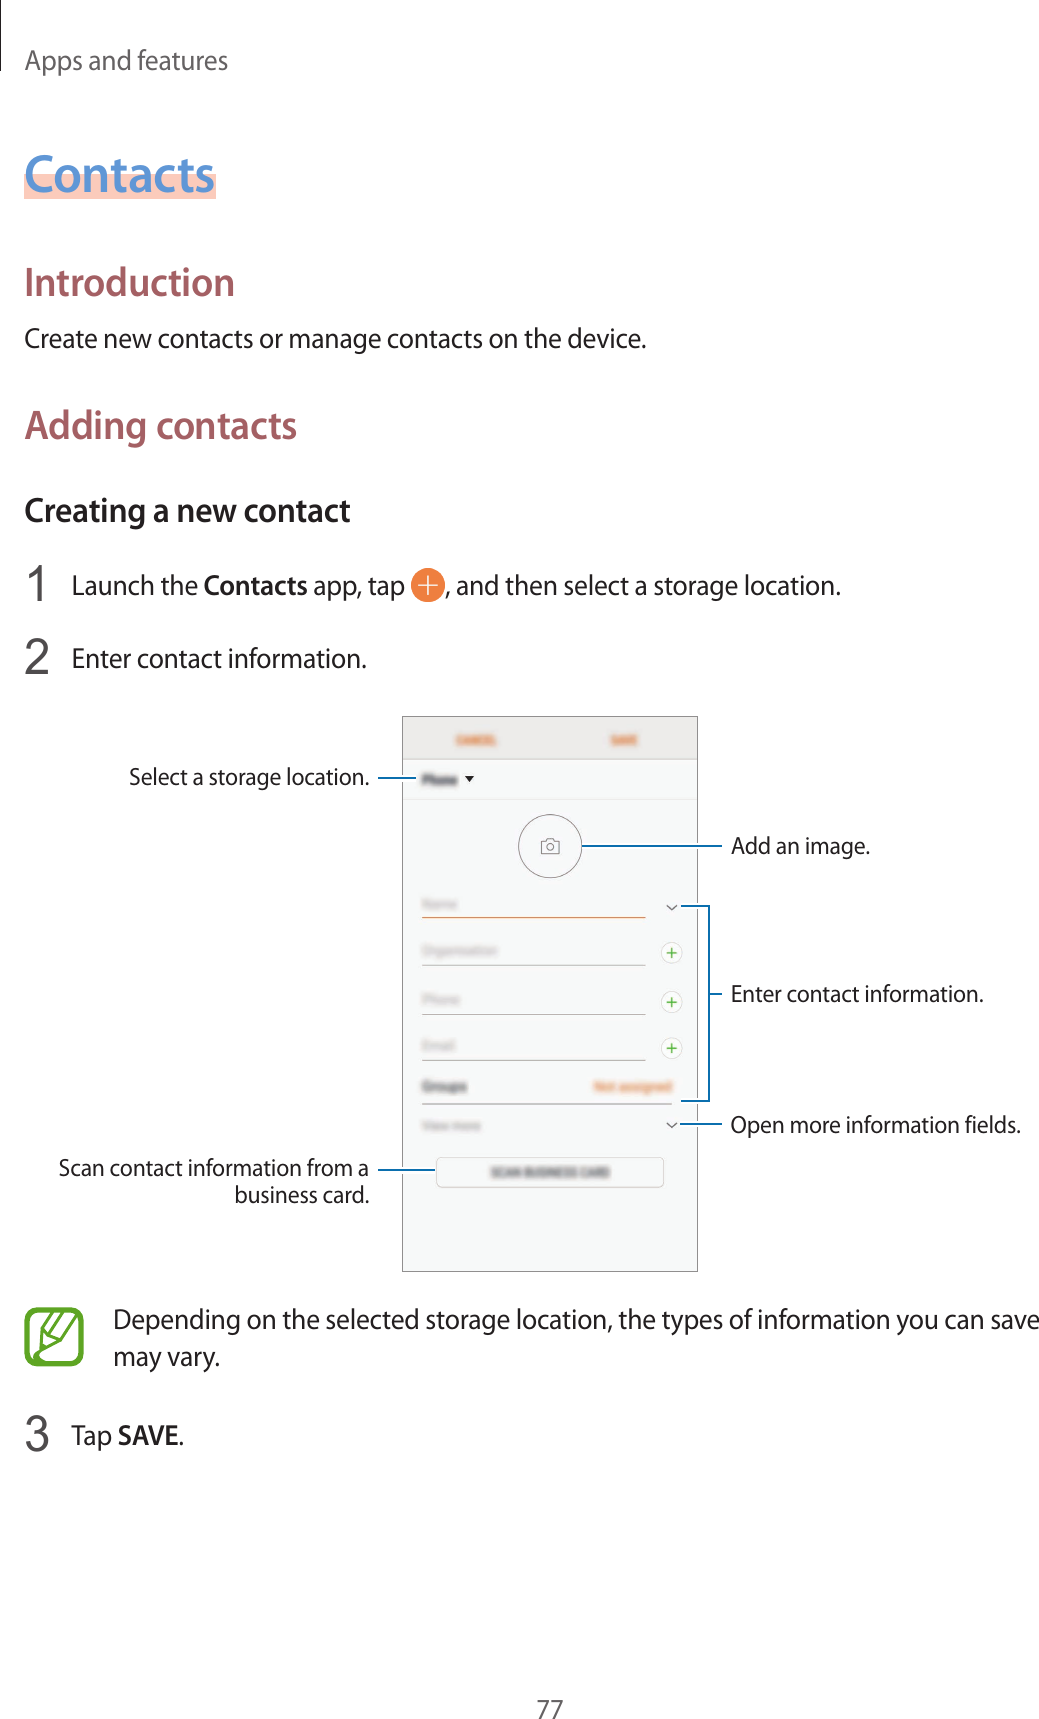 Apps and features77ContactsIntroductionCreate new contacts or manage contacts on the device.Adding contactsCreating a new contact1  Launch the Contacts app, tap  , and then select a storage location.2  Enter contact information.Select a storage location.Add an image.Open more information fields.Scan contact information from a business card.Enter contact information.Depending on the selected storage location, the types of information you can save may vary.3  Tap SAVE.